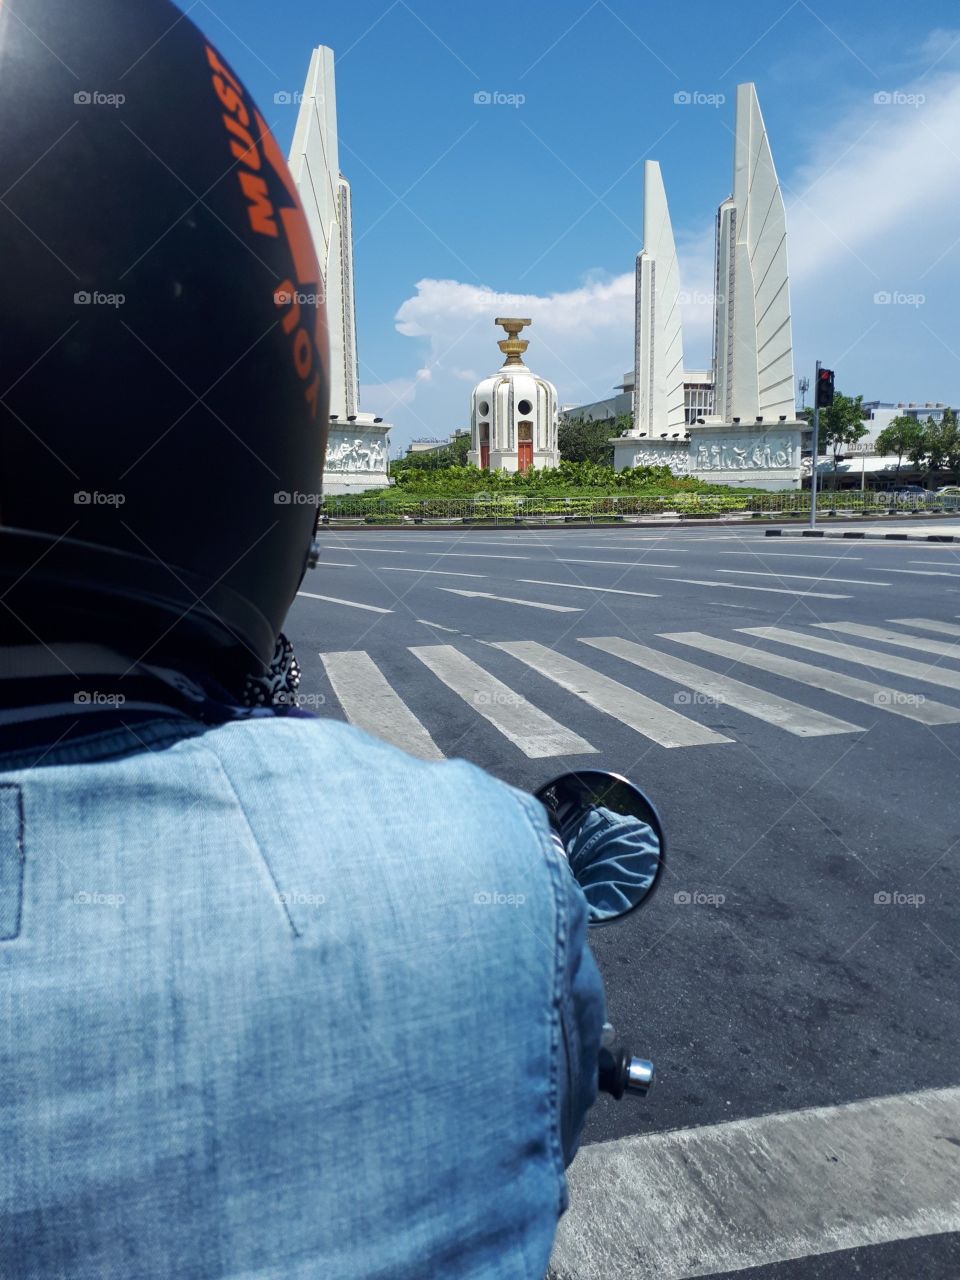 go to monument in thailand bangkok